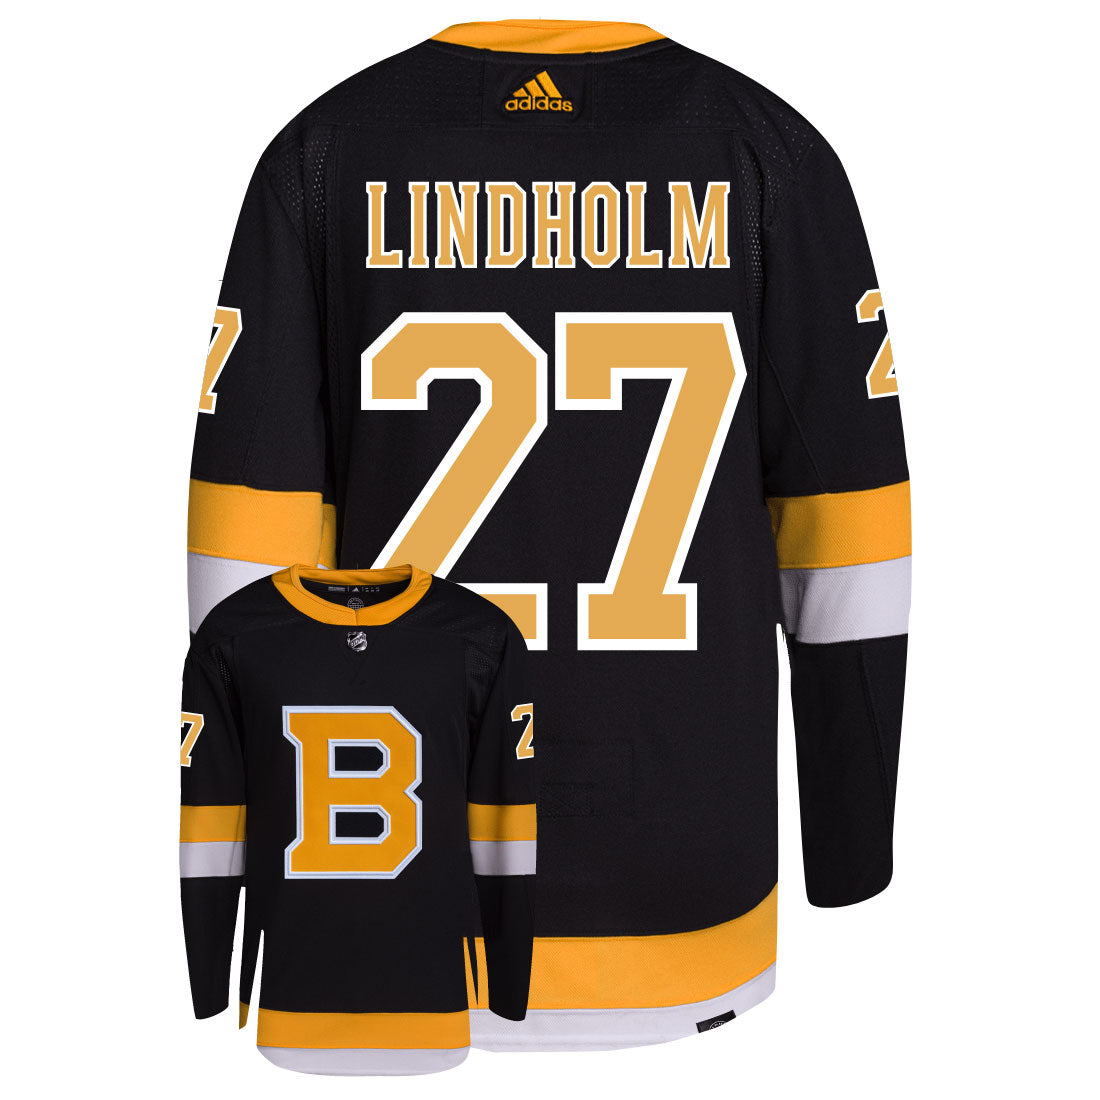 Hampus Lindholm Boston Bruins Adidas Primegreen Authentic Third Alternate NHL Hockey Jersey - Back/Front View